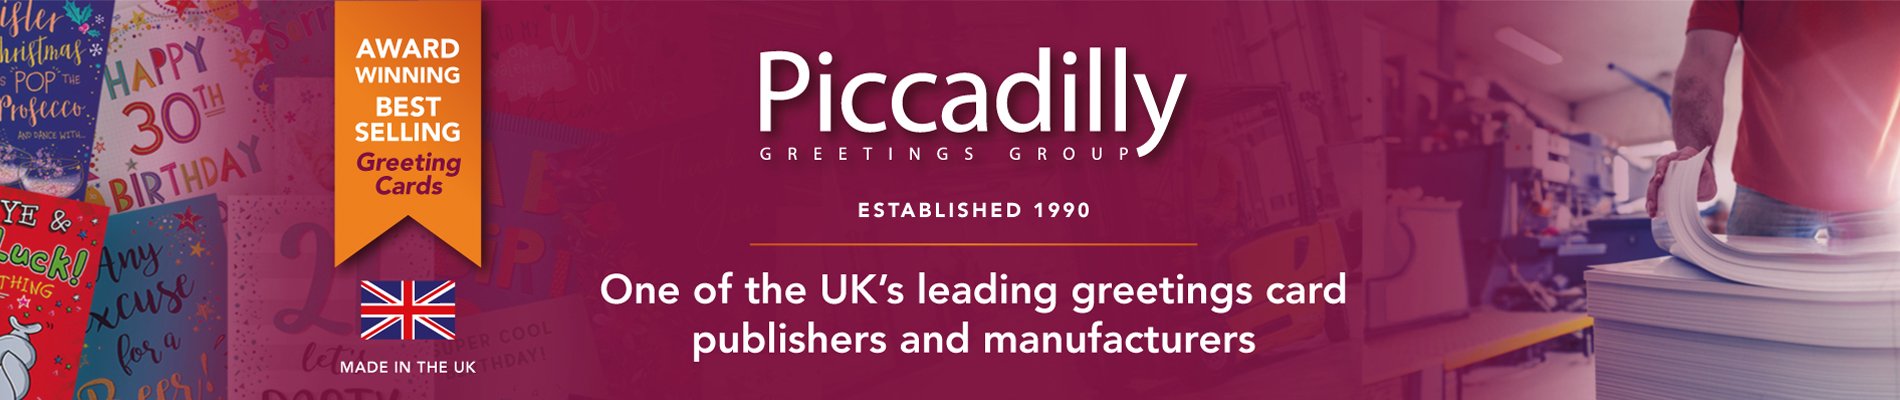 2023_PICCADILLY_HOME-PAGE-WEB-BANNER_AW.jpg